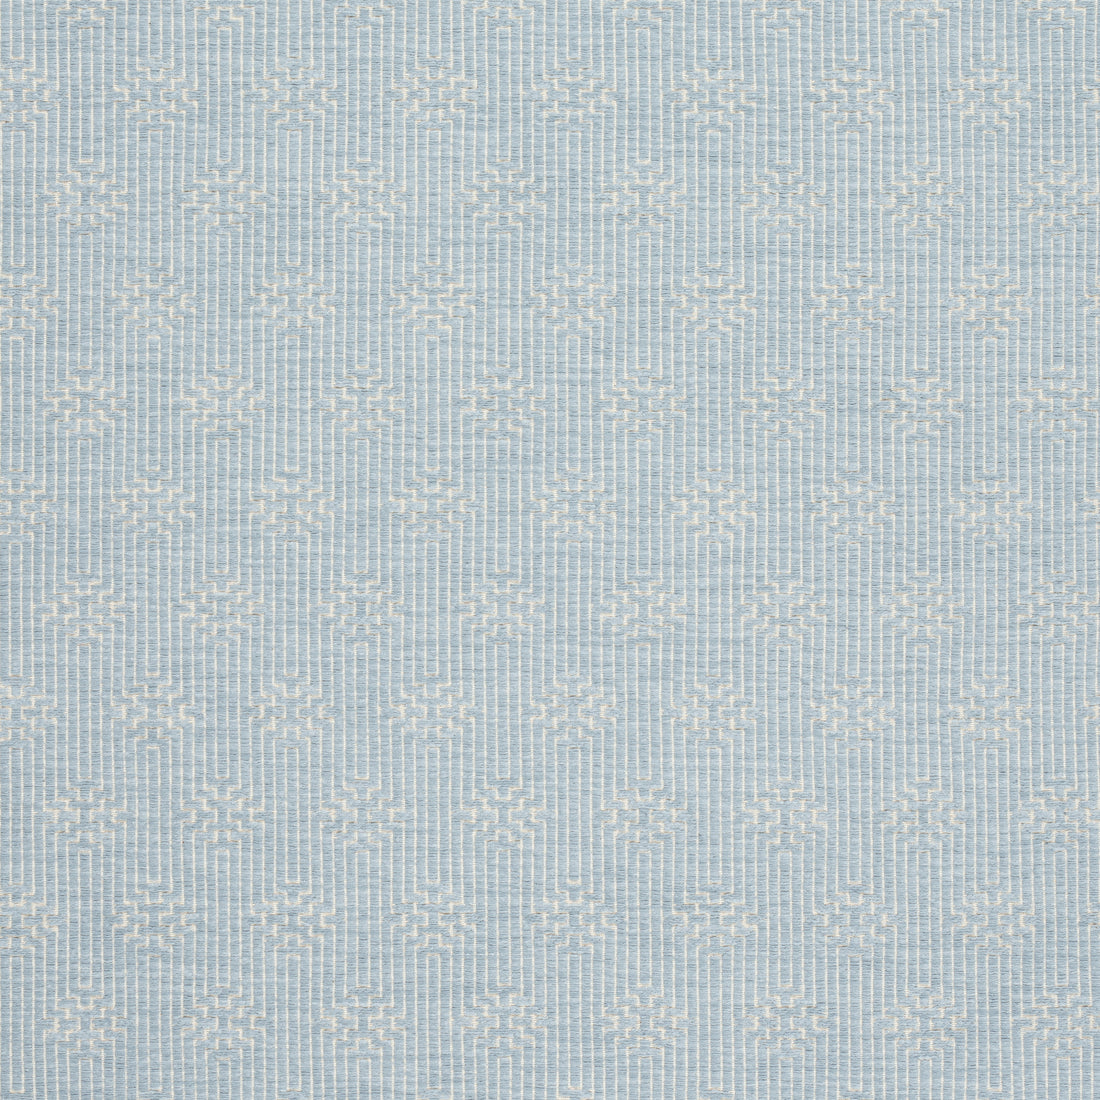 Crete fabric in powder color - pattern number W74209 - by Thibaut in the Passage collection